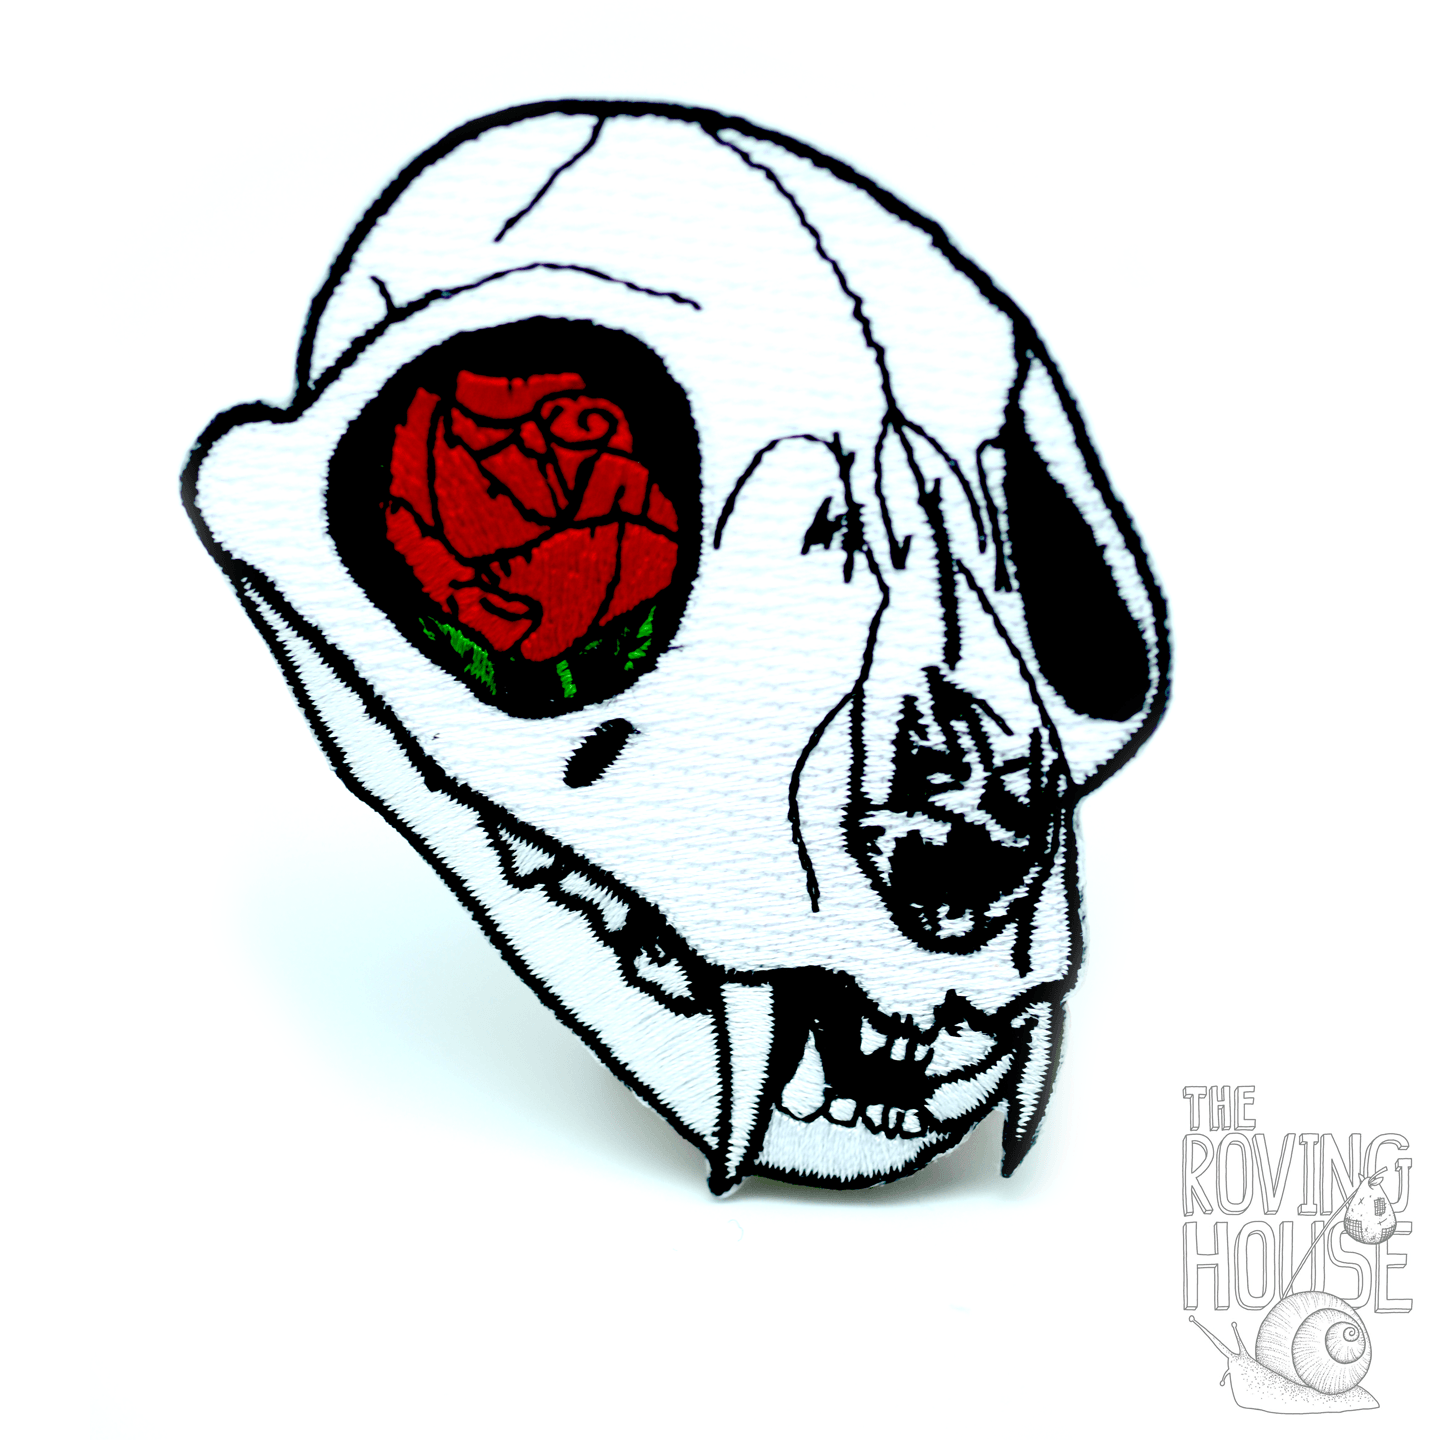 A black and white embroidered patch of a cat skull with a red rose in its eye socket.